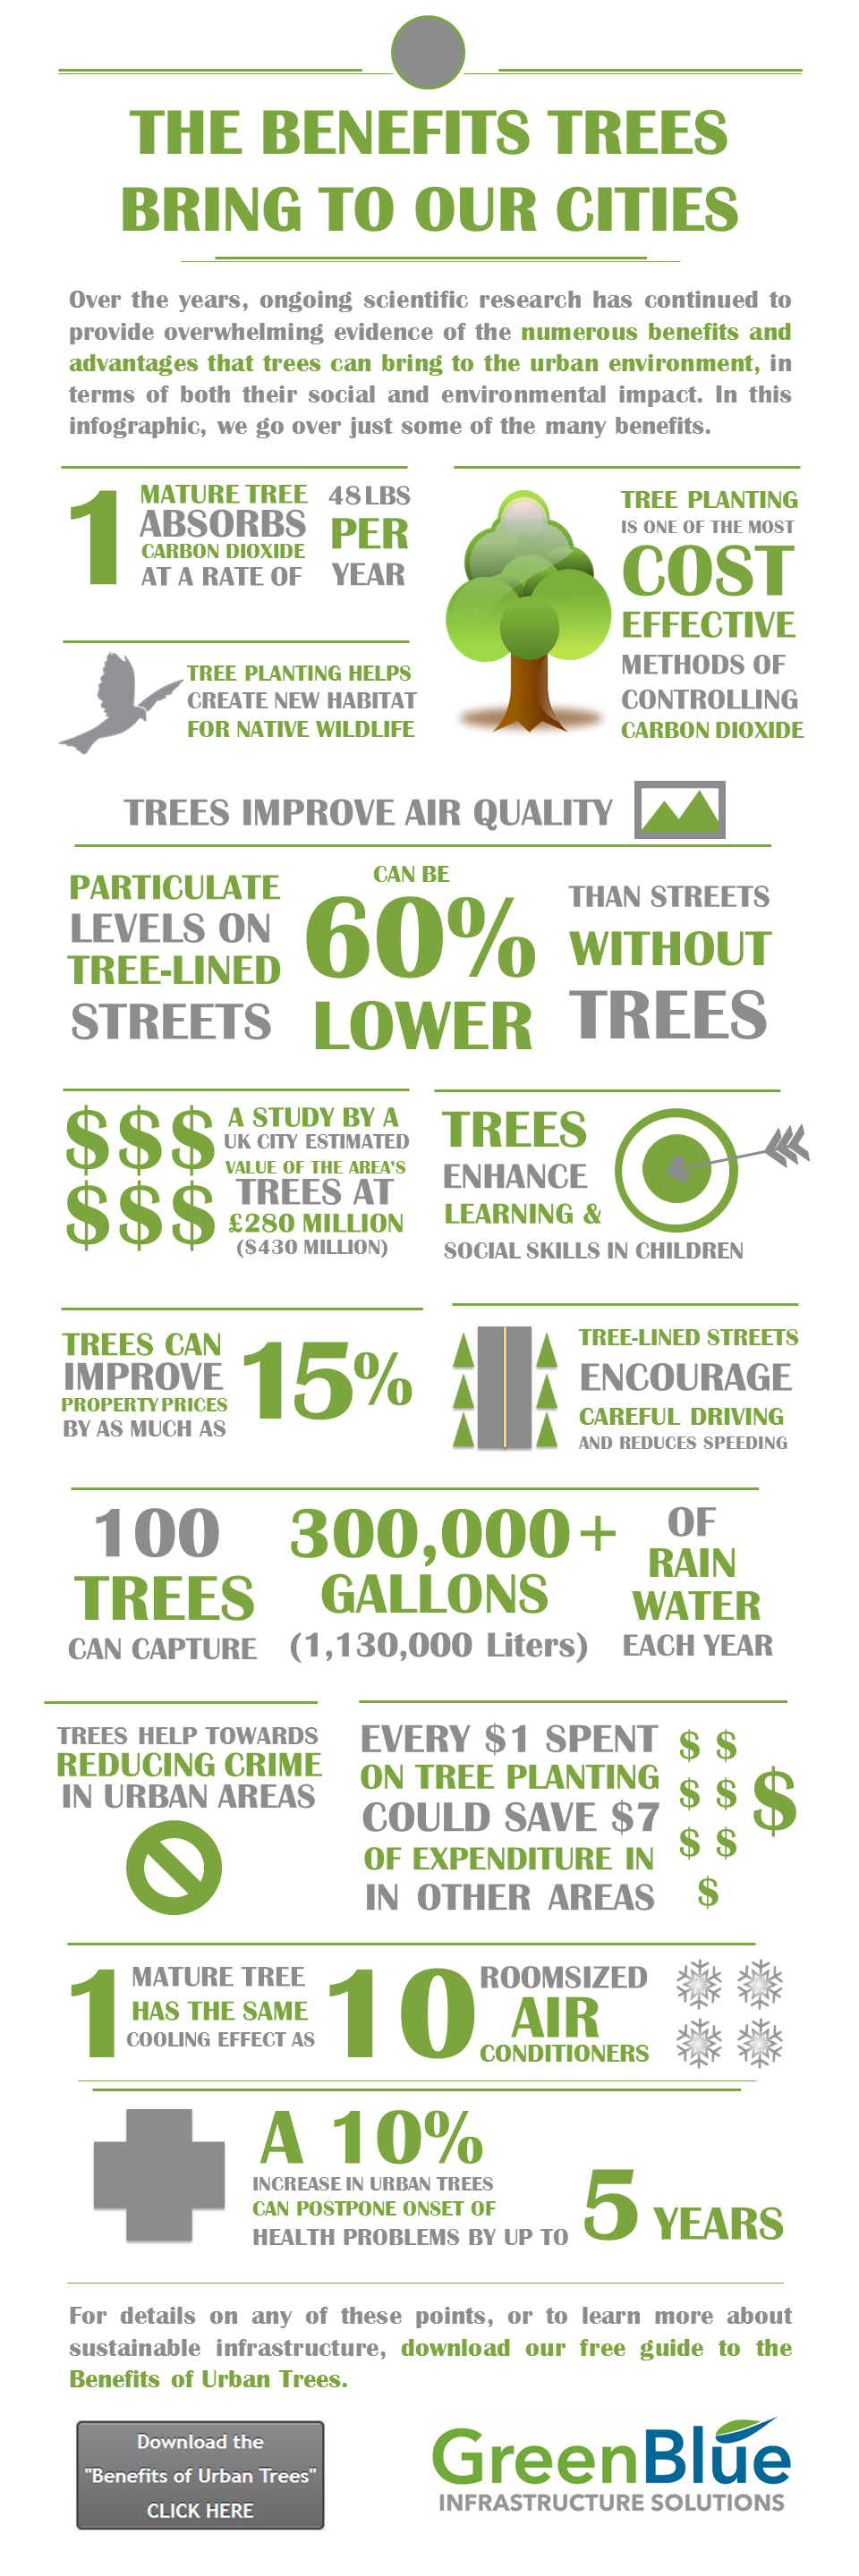 What Trees Bring to our Cities